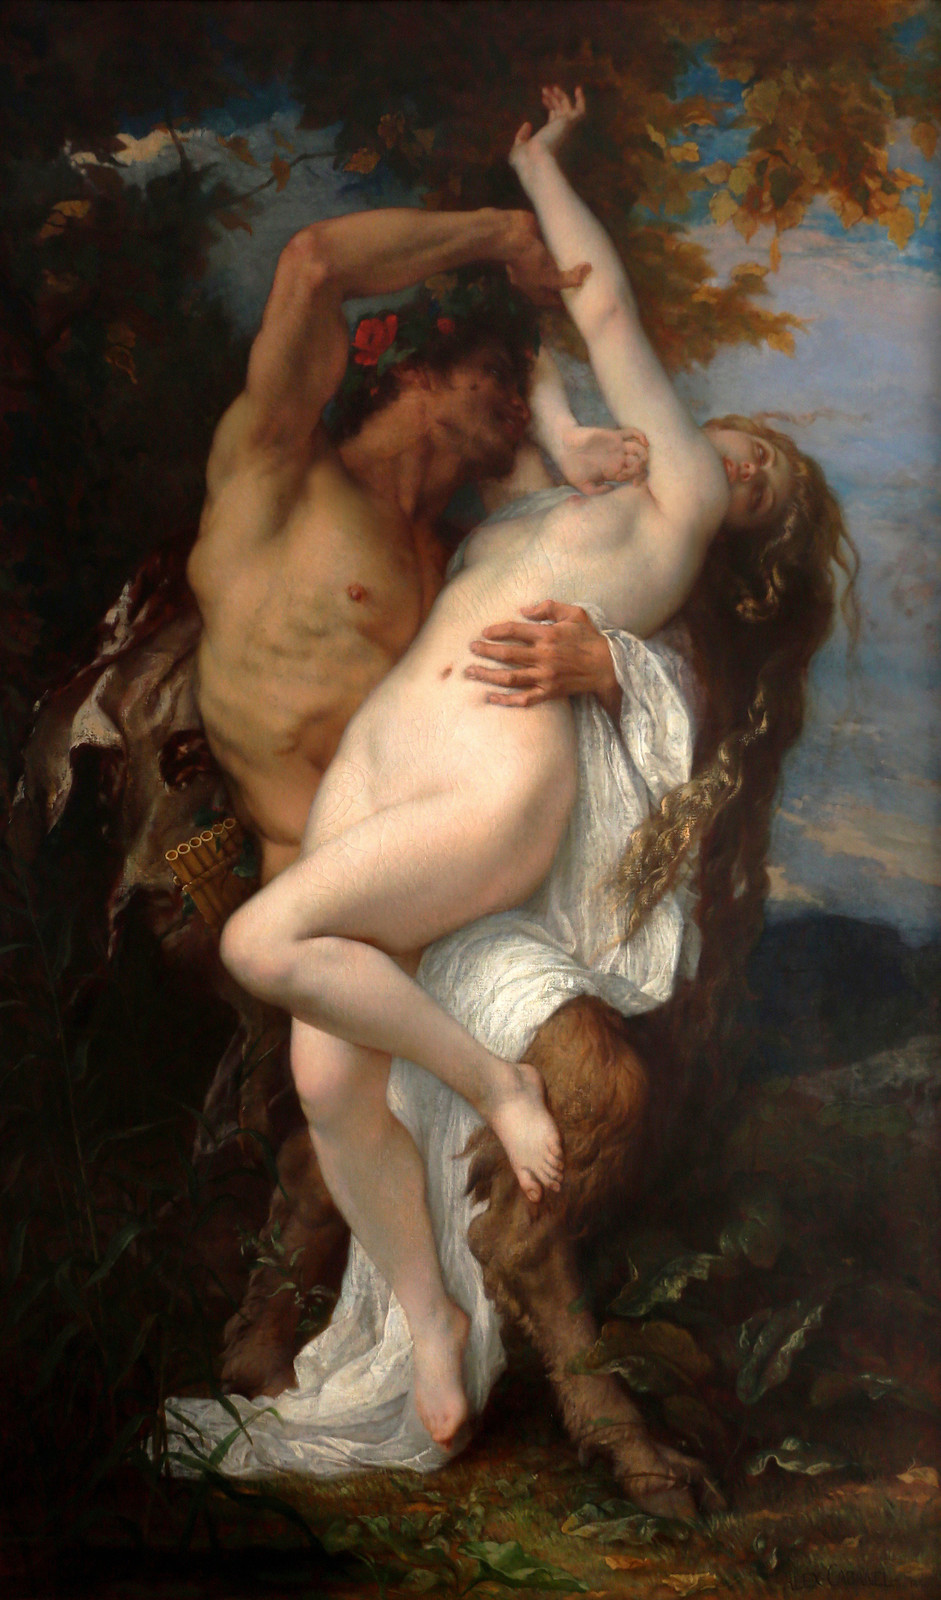 Nymph abducted by a faun  (1860) by Alexandre Cabanel